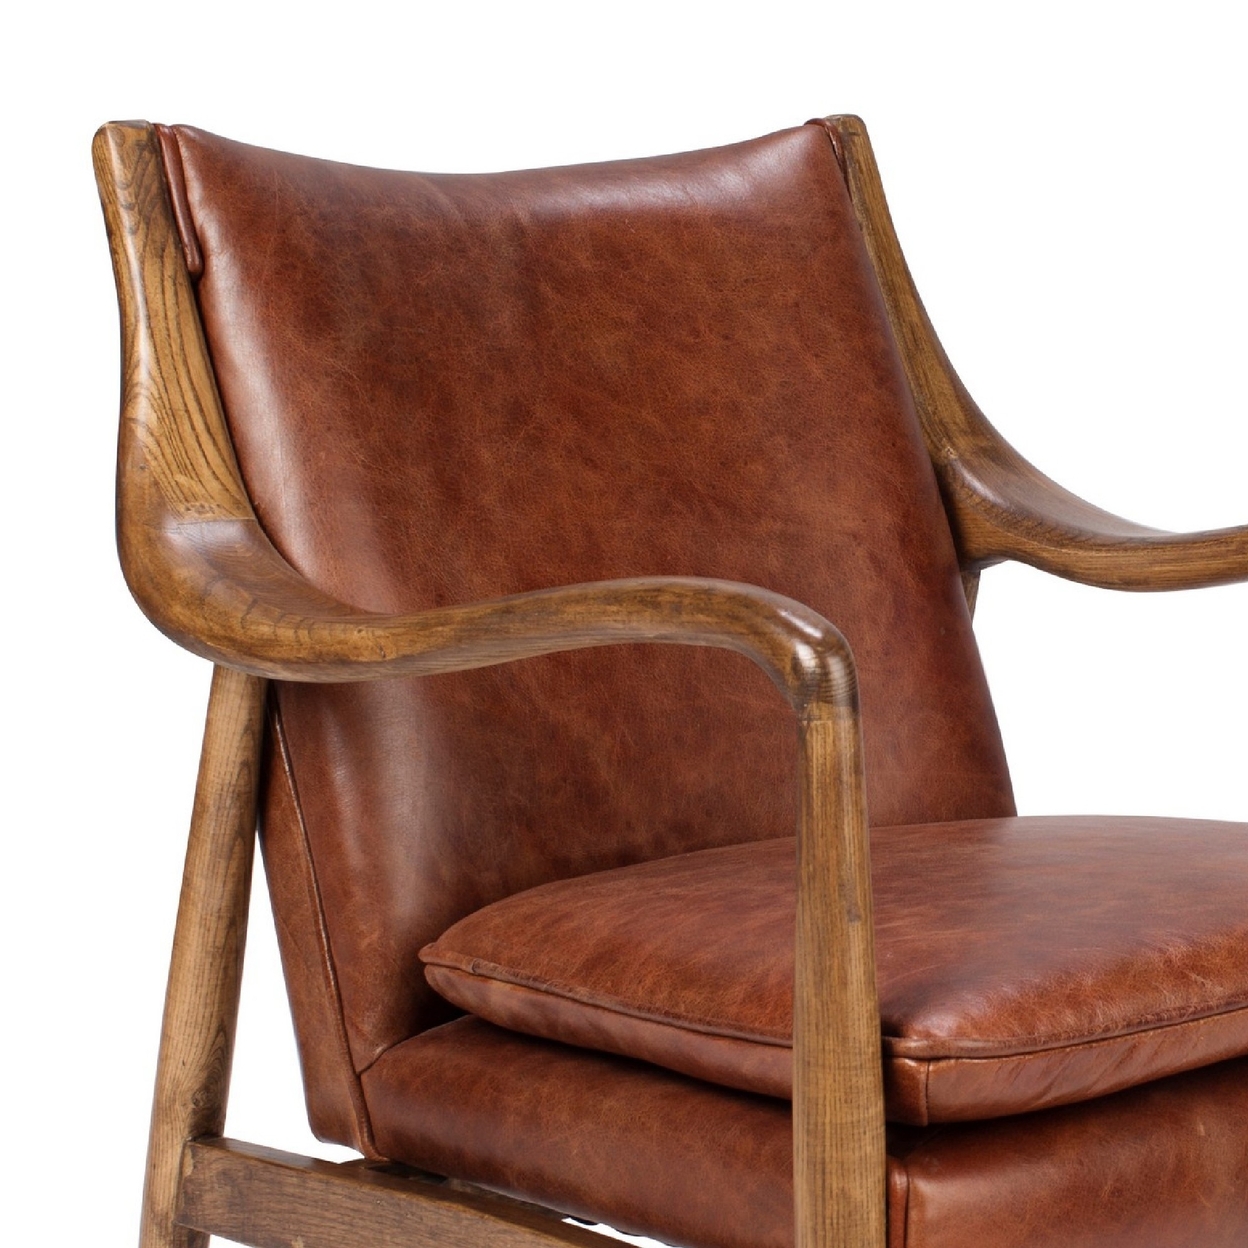 29 Inch Classic Wood Club Chair, Top Grain Leather Seat, Curved Arms, Brown- Saltoro Sherpi